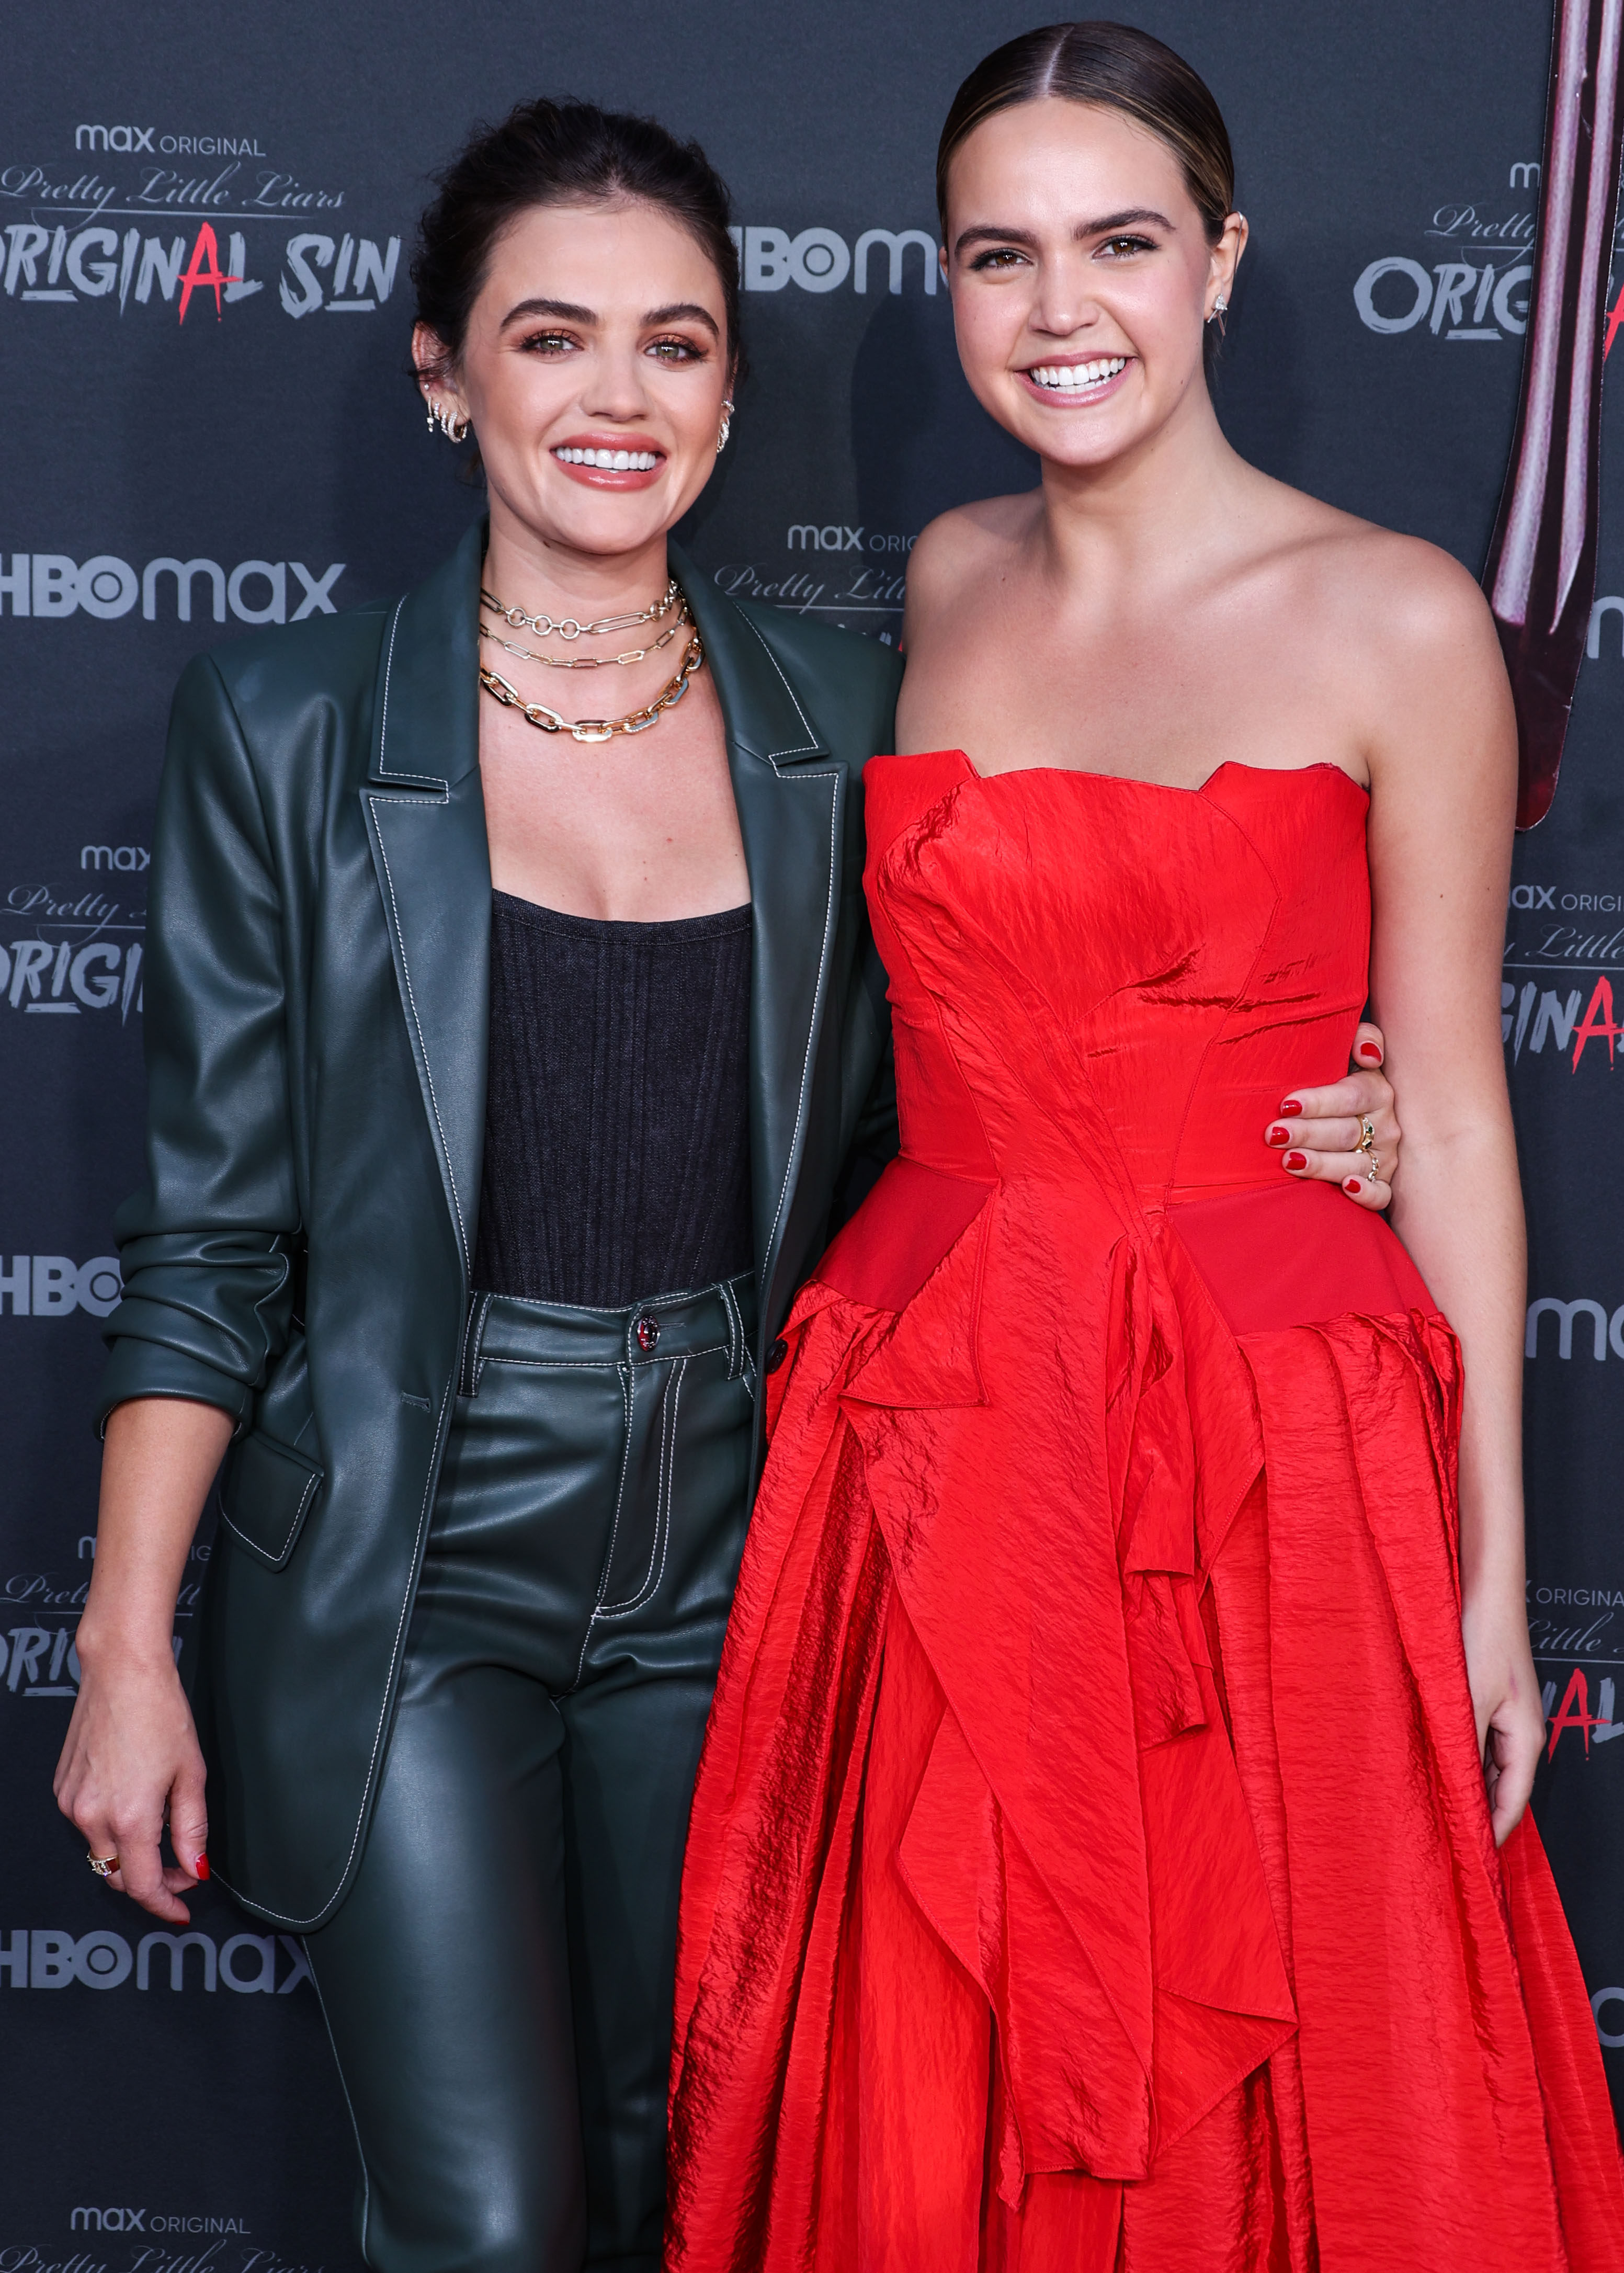 Lucy Hale told Bailee Madison to audition for Pretty Little Liars